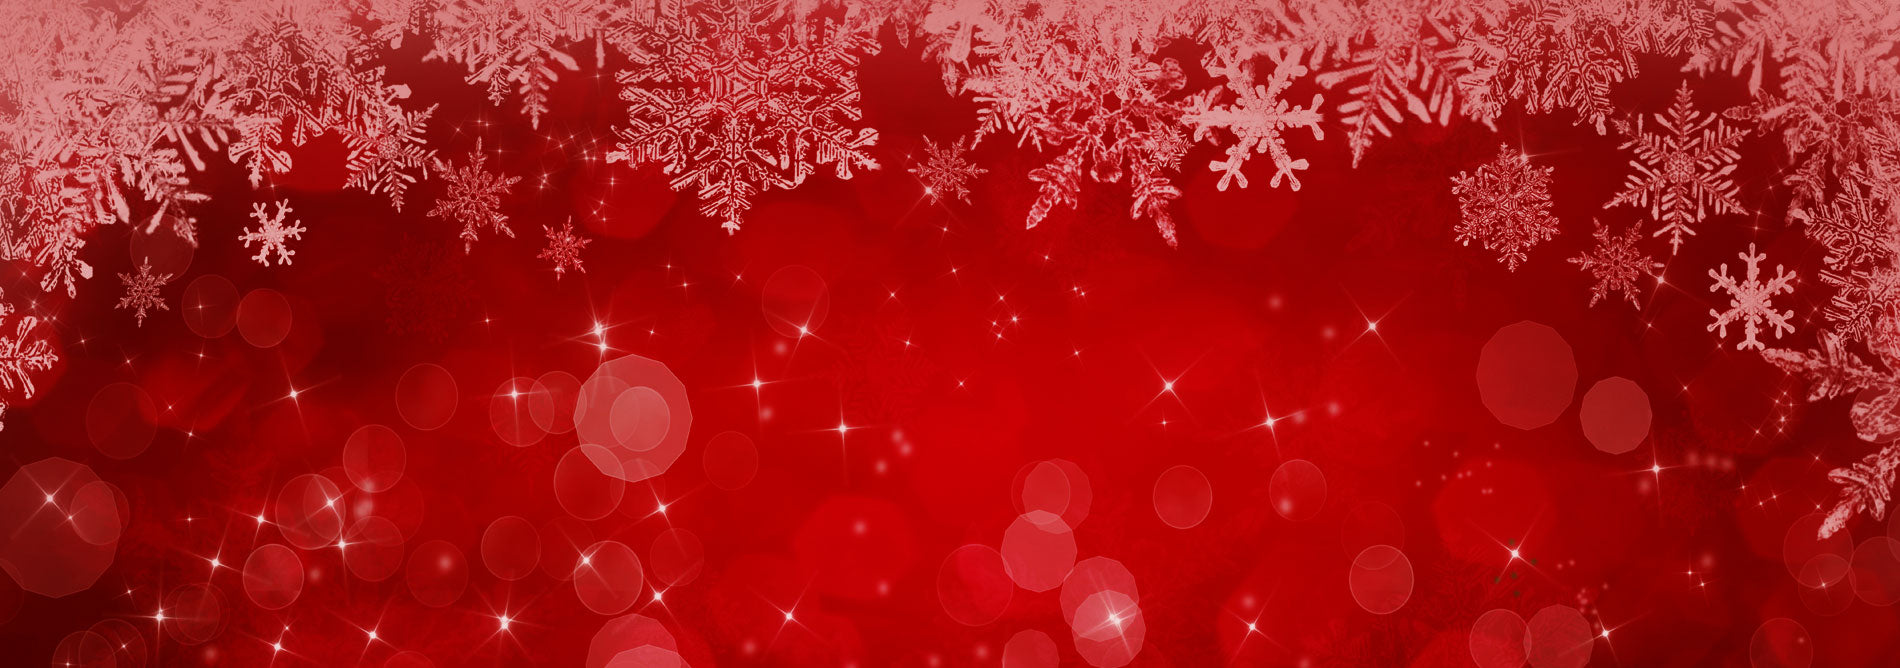 background image with snowflakes and sparkles